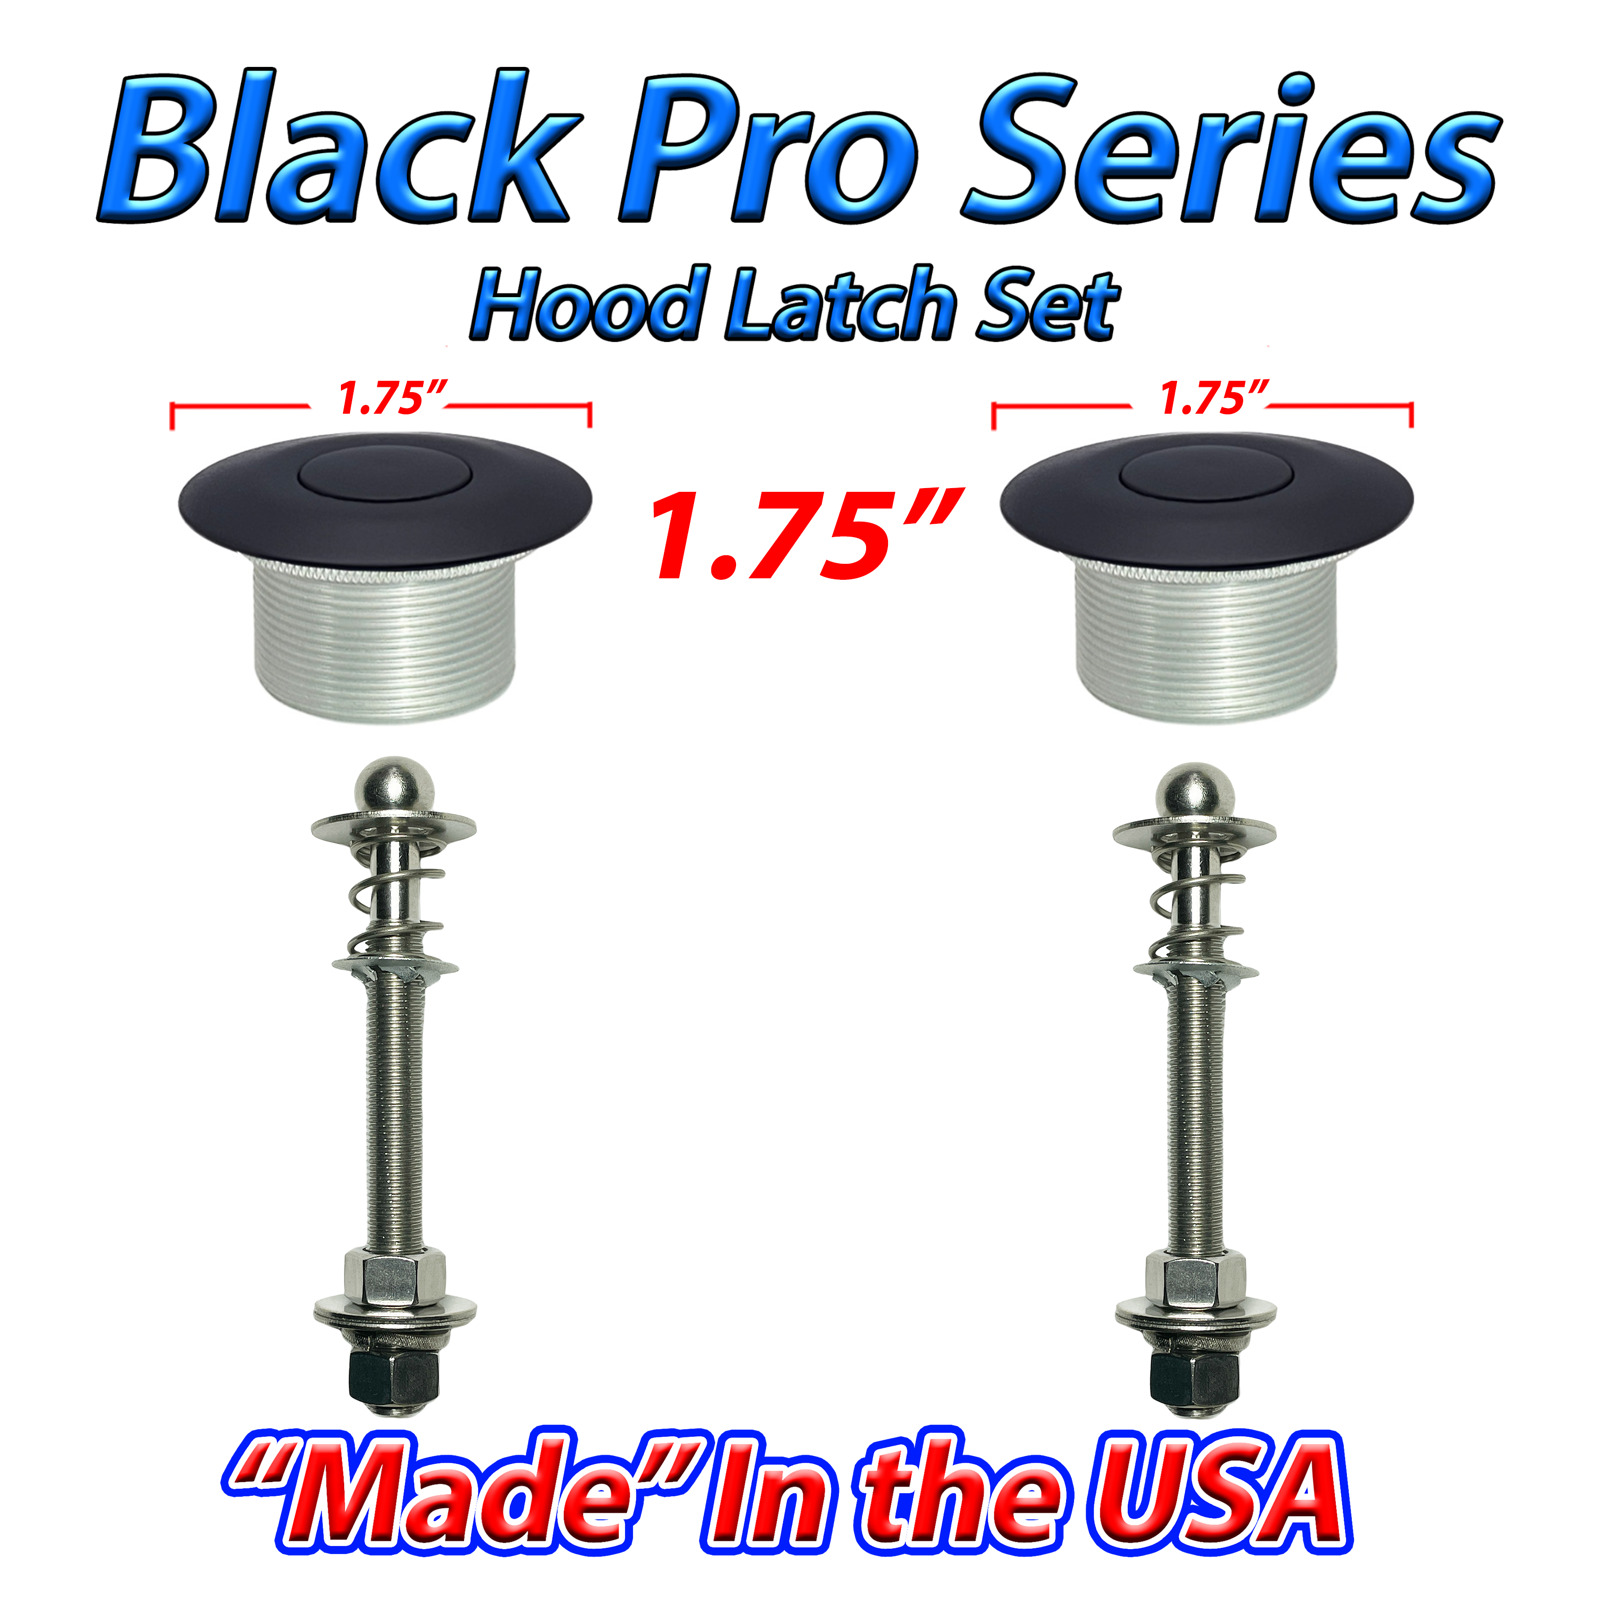 Quick Latch Hood Pin Set 2 Push Button Latch Hood Pins Latches MADE IN USA NHRA